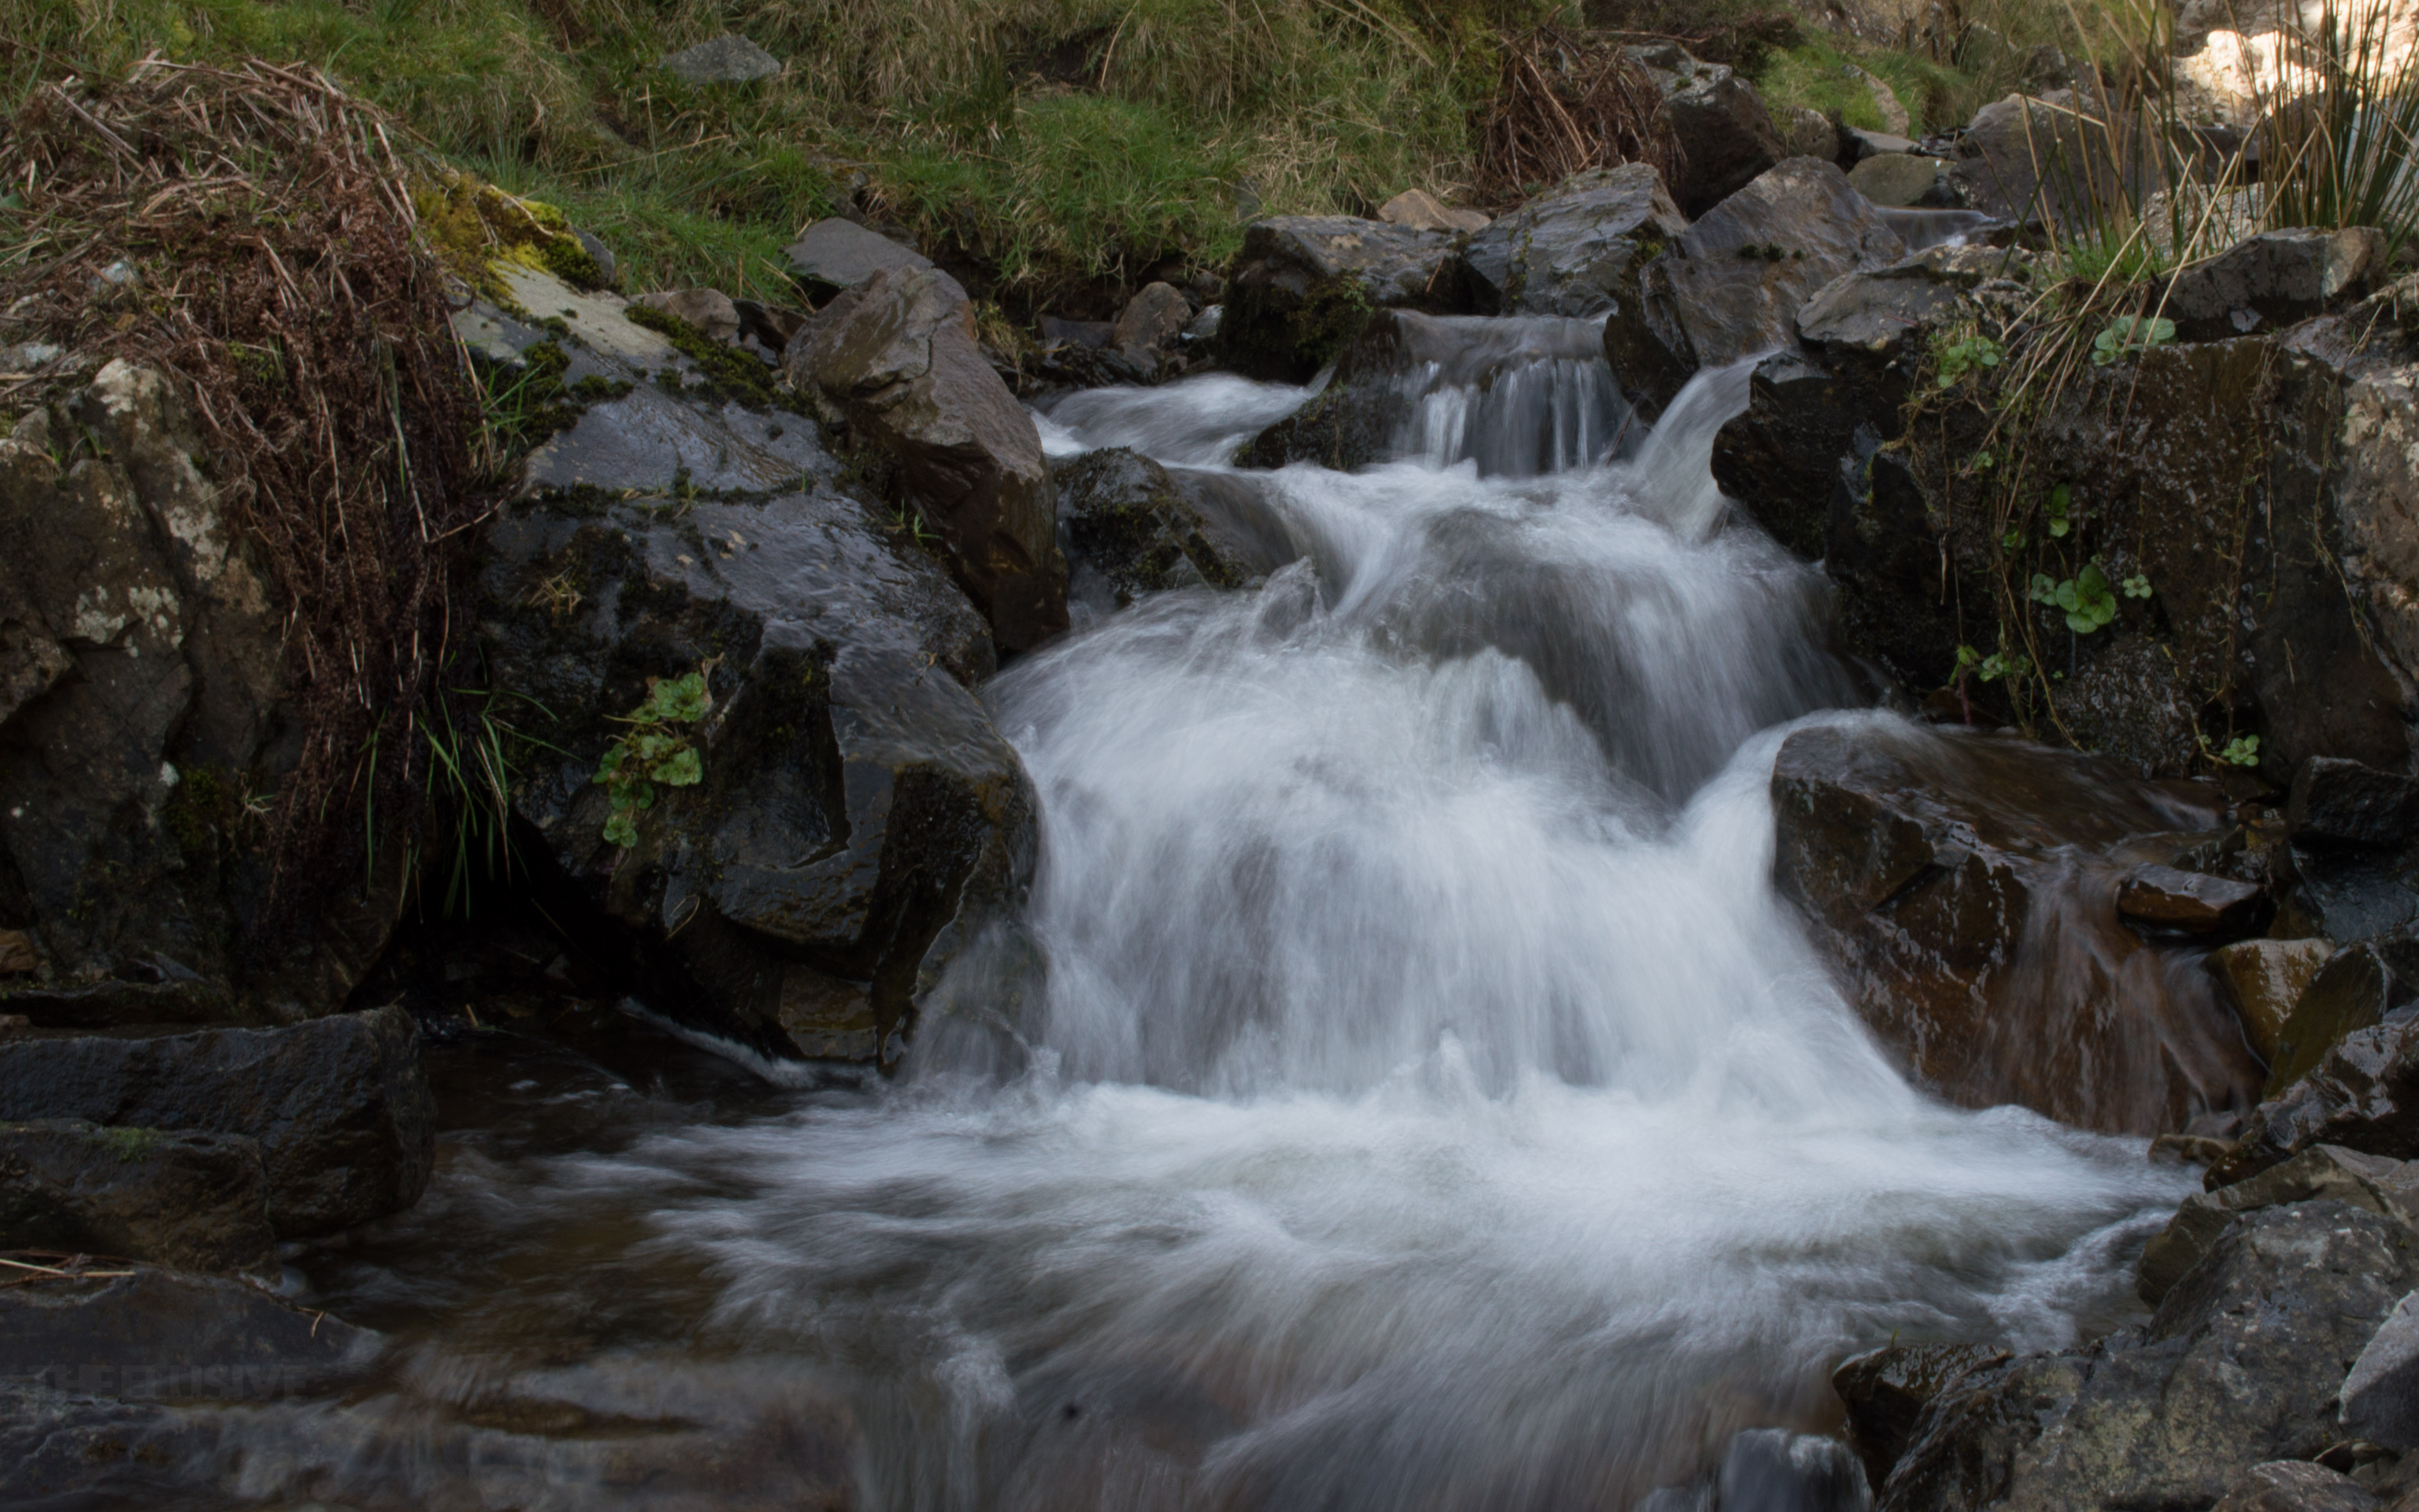 cardingmill valley waterfall (51 of 218)